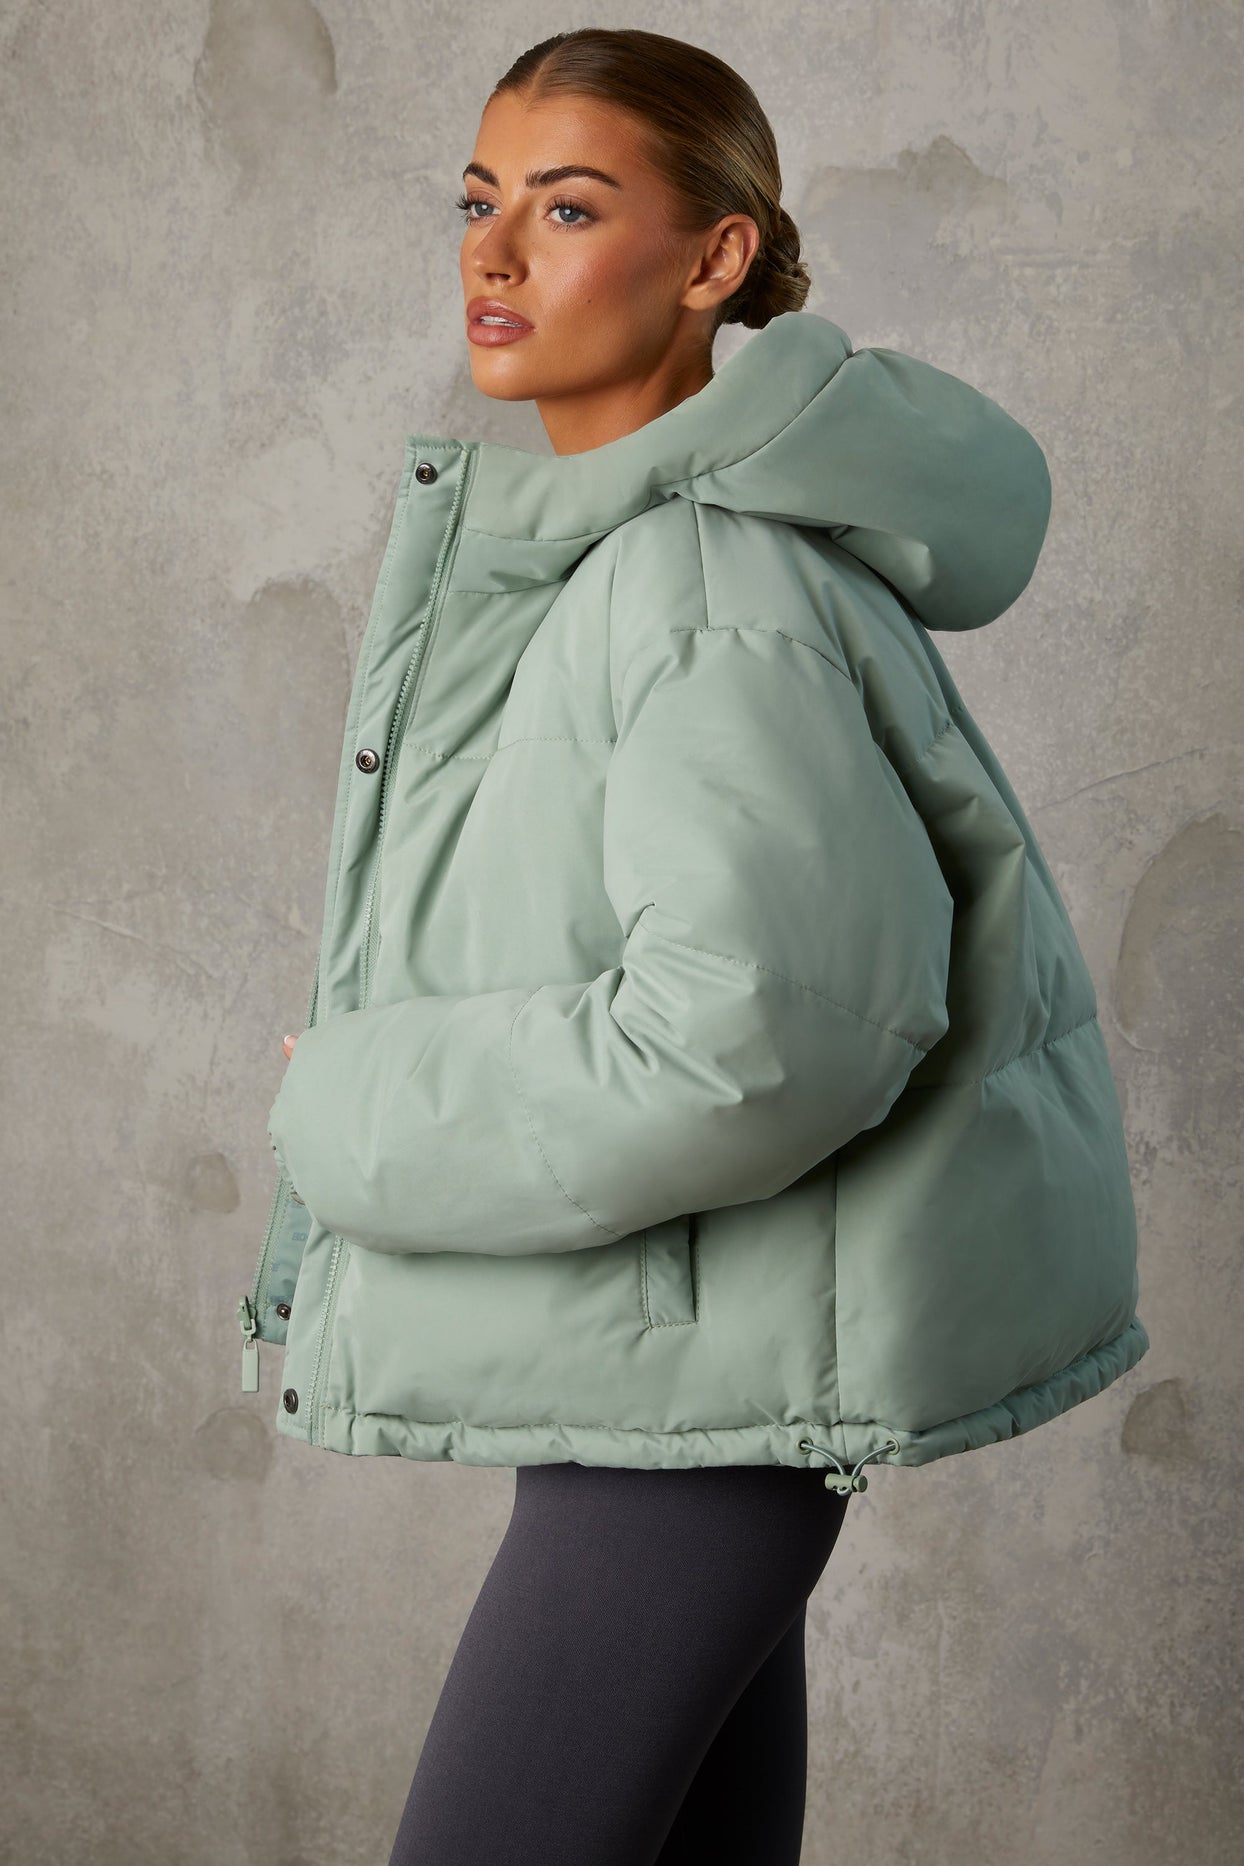 Plush and Sustainable Puffer Jackets with Gap Canada - My Curves